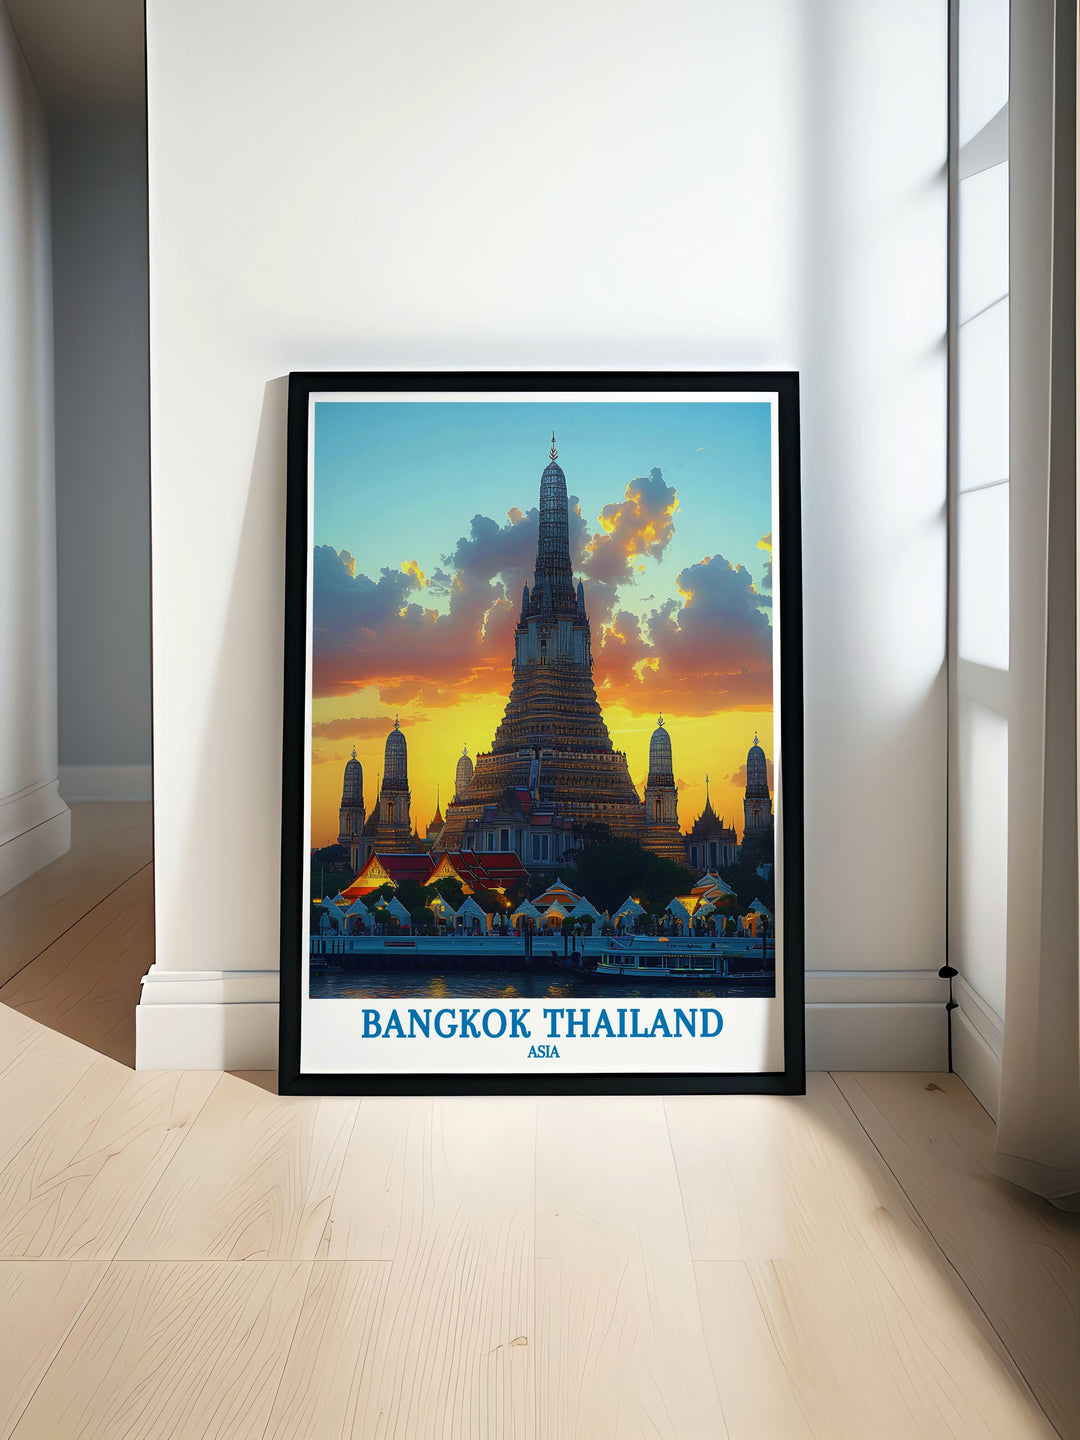 Wat Arun framed art capturing the intricate details and majestic spires of the Temple of Dawn, perfect for adding a touch of cultural richness and historical beauty to any living space.